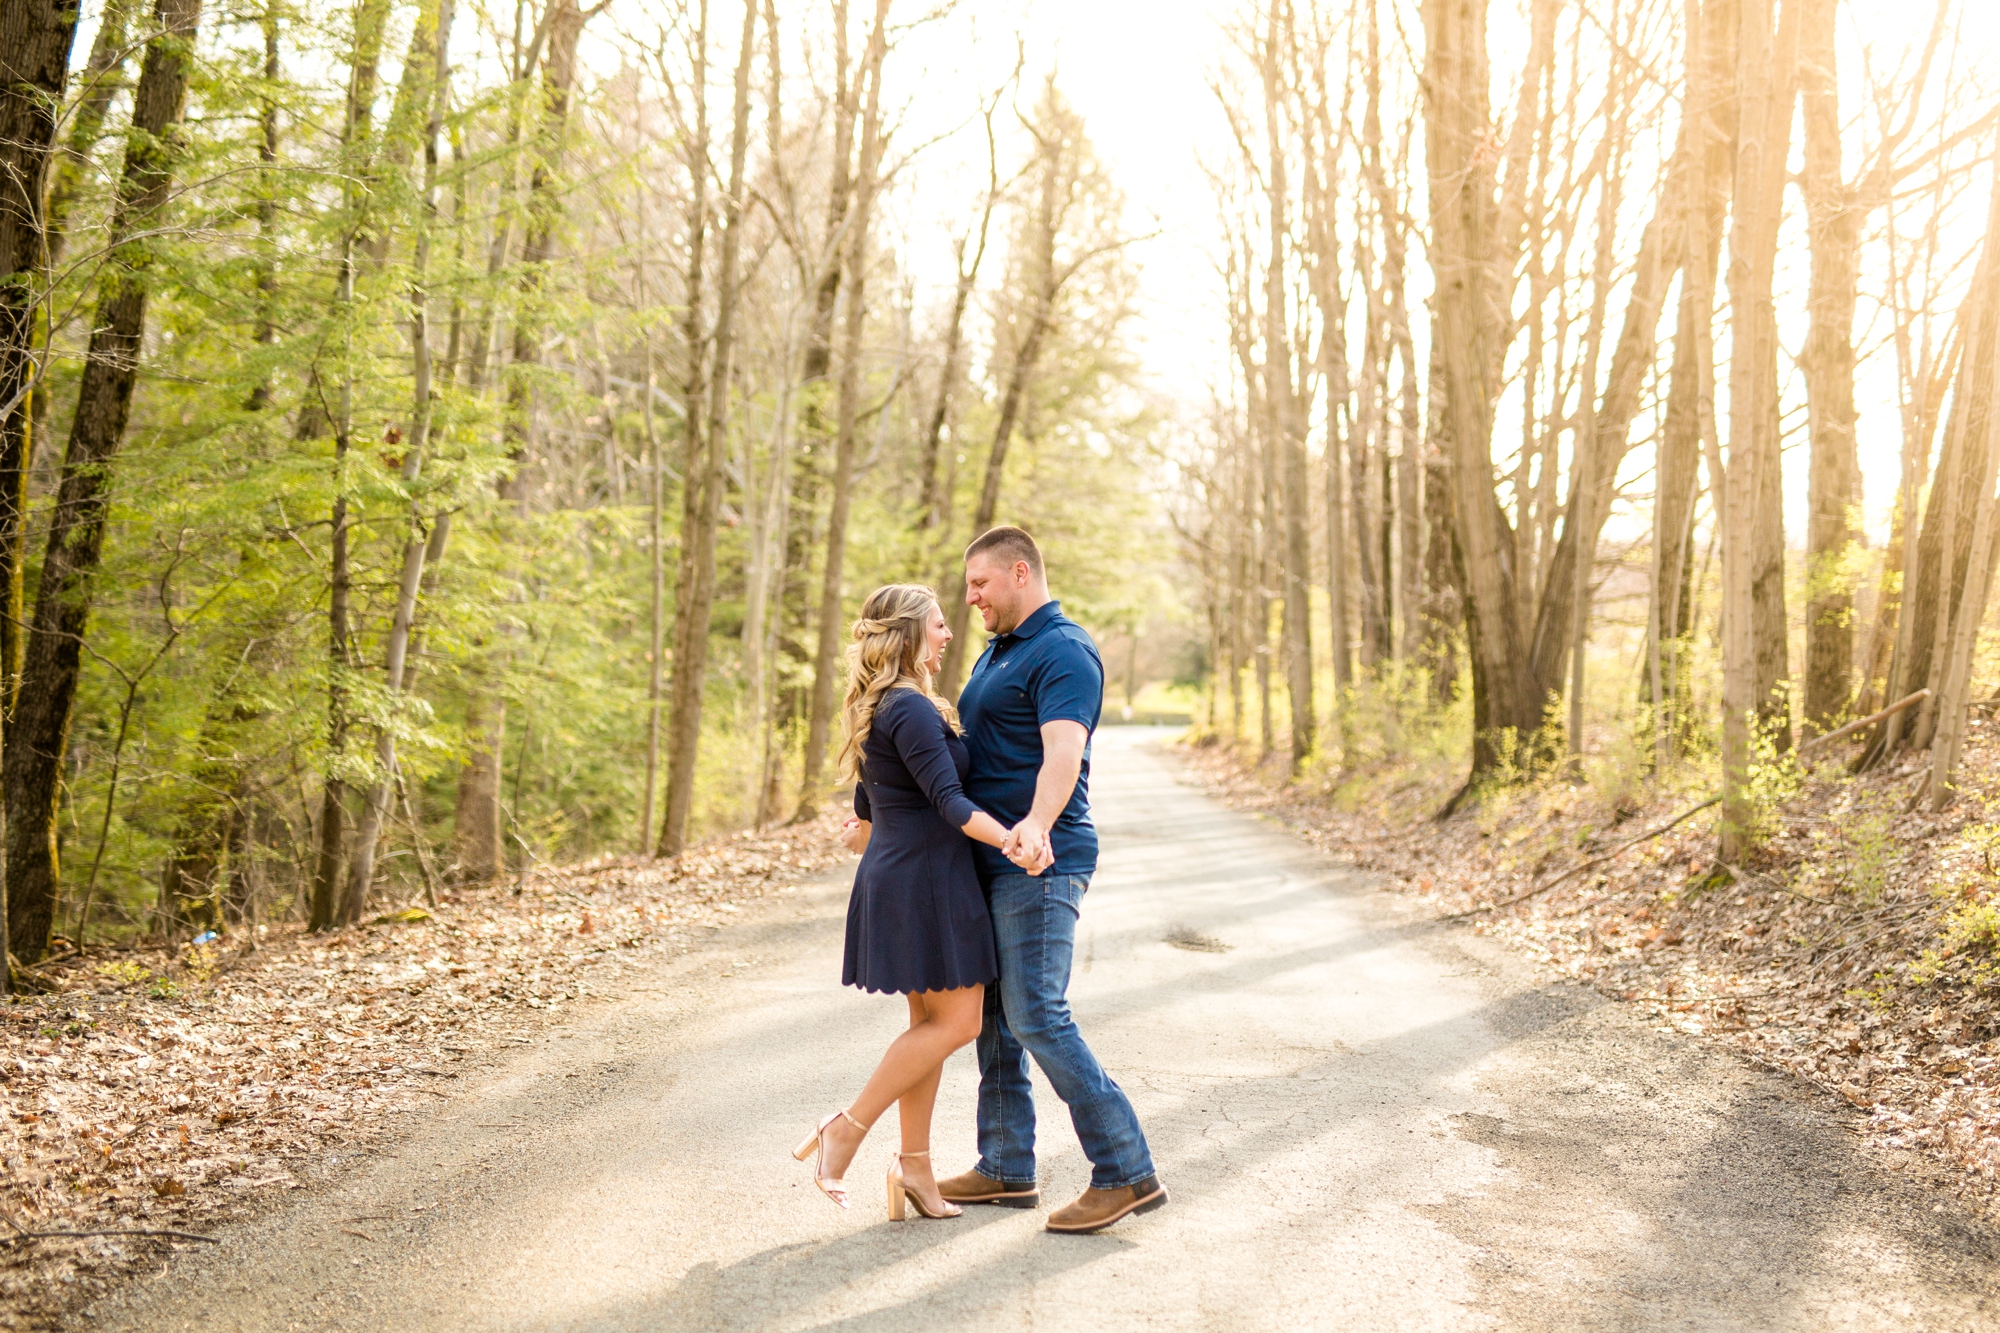 mcconnells mill engagement pictures, mcconnells mill wedding photos, cleleand rock, moraine state park engagement photos, pittsburgh wedding photographer